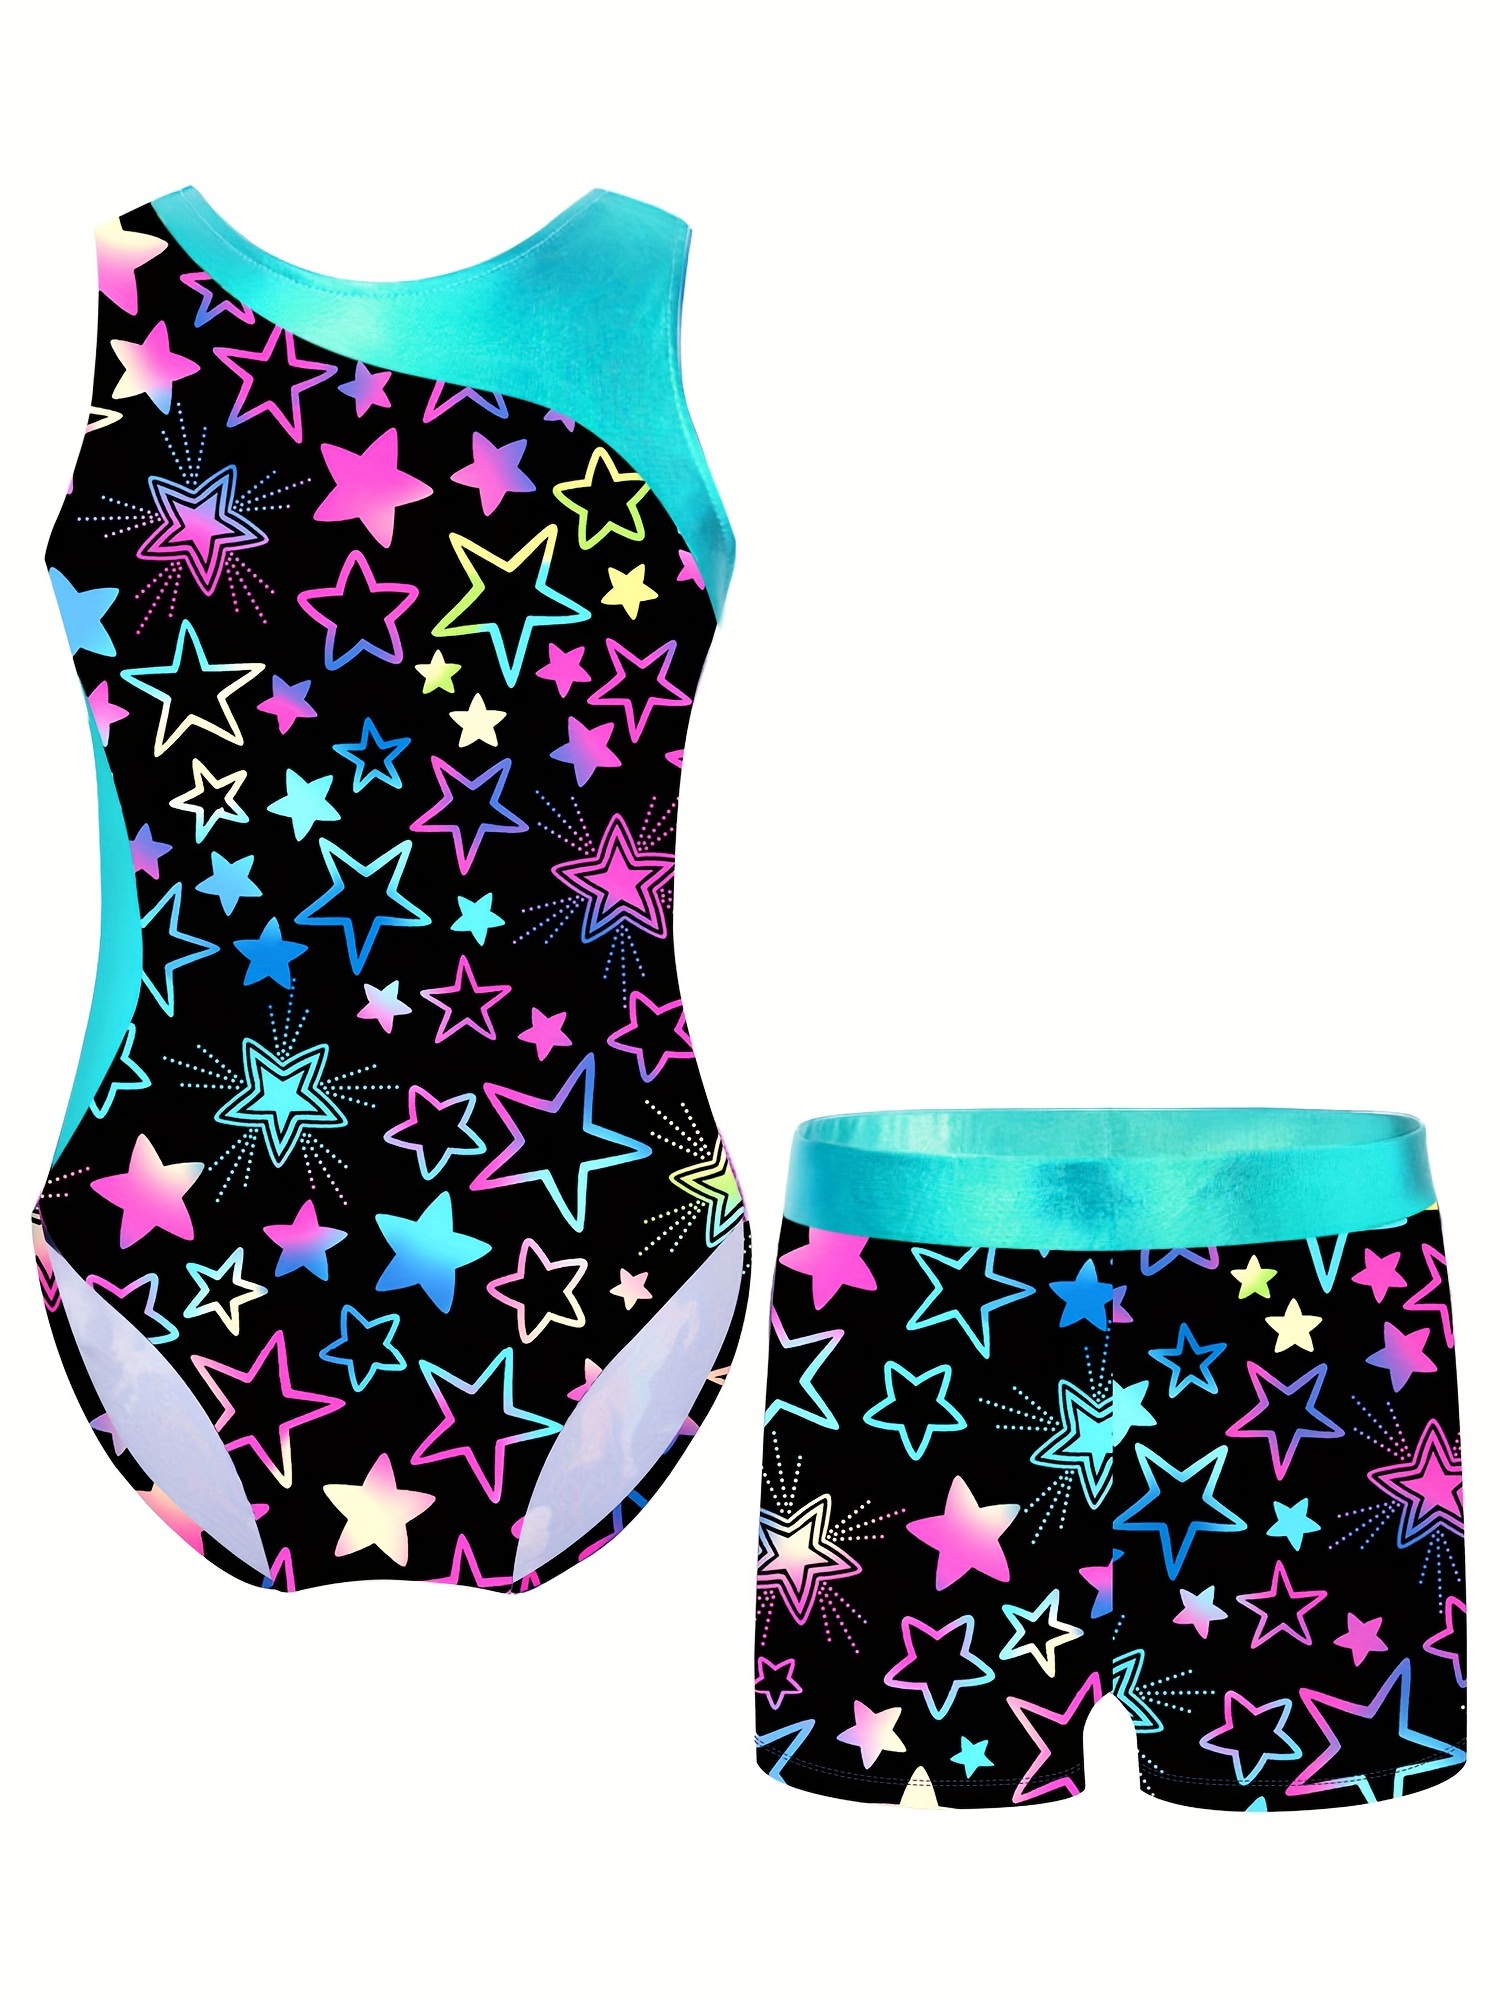 Girls 2-Piece Sports Dance Outfits Athletic Leotard and Gymnastic Leggings  Set